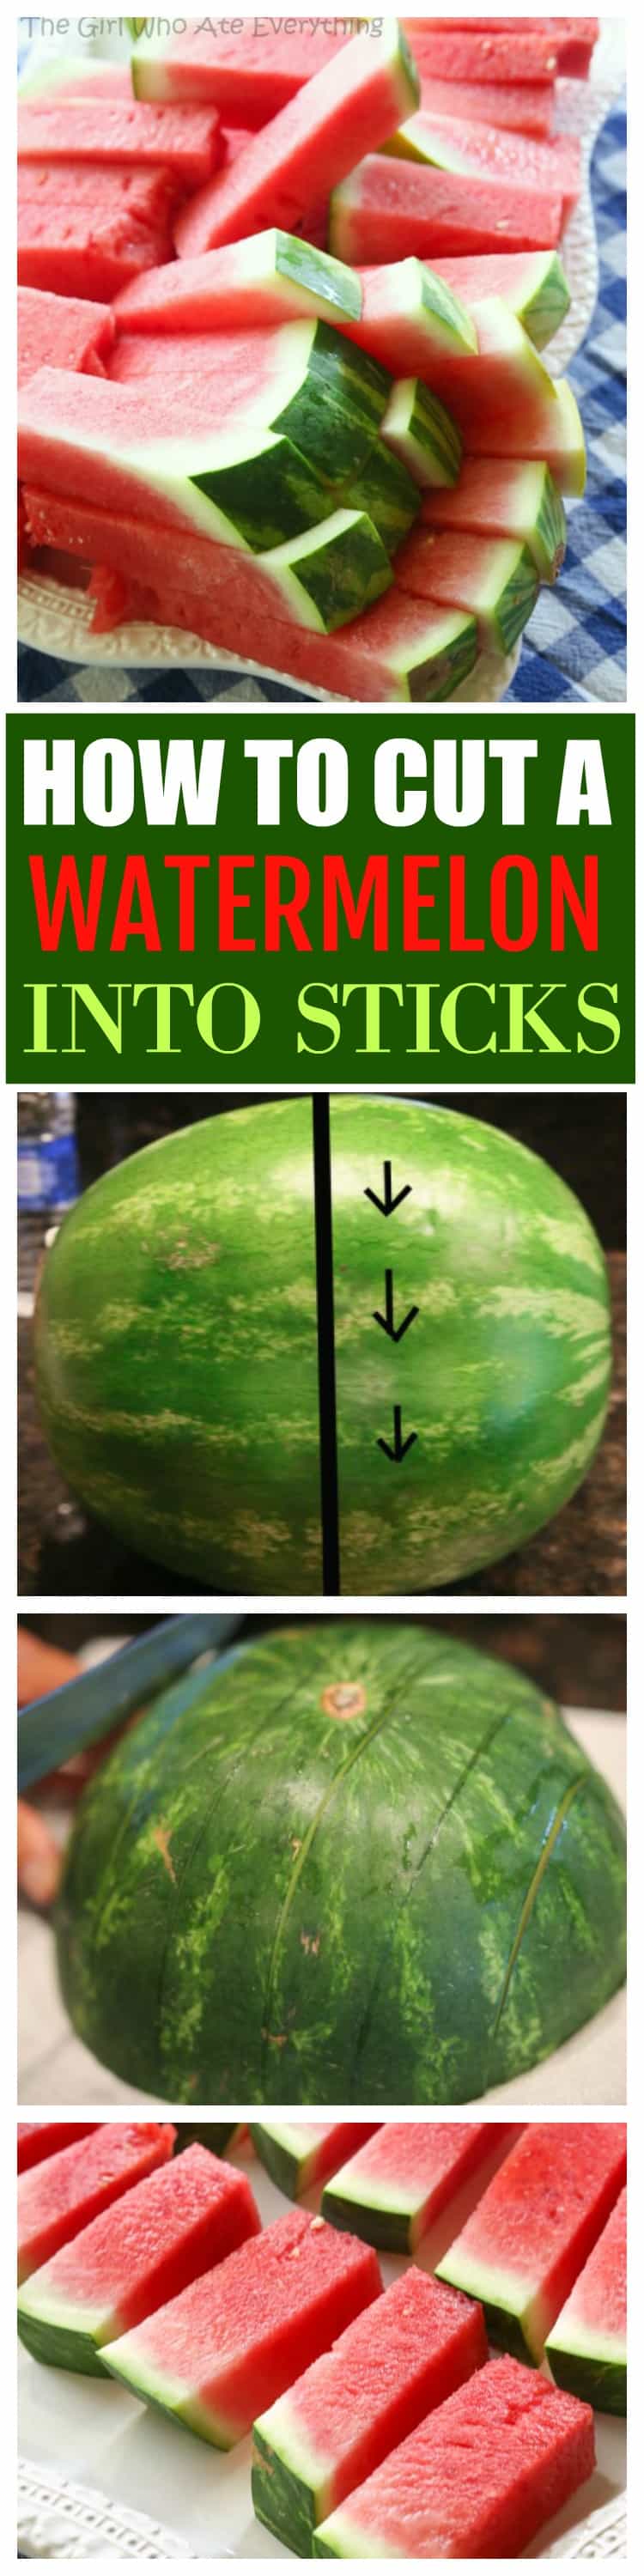 How to Cut A Watermelon Into Sticks